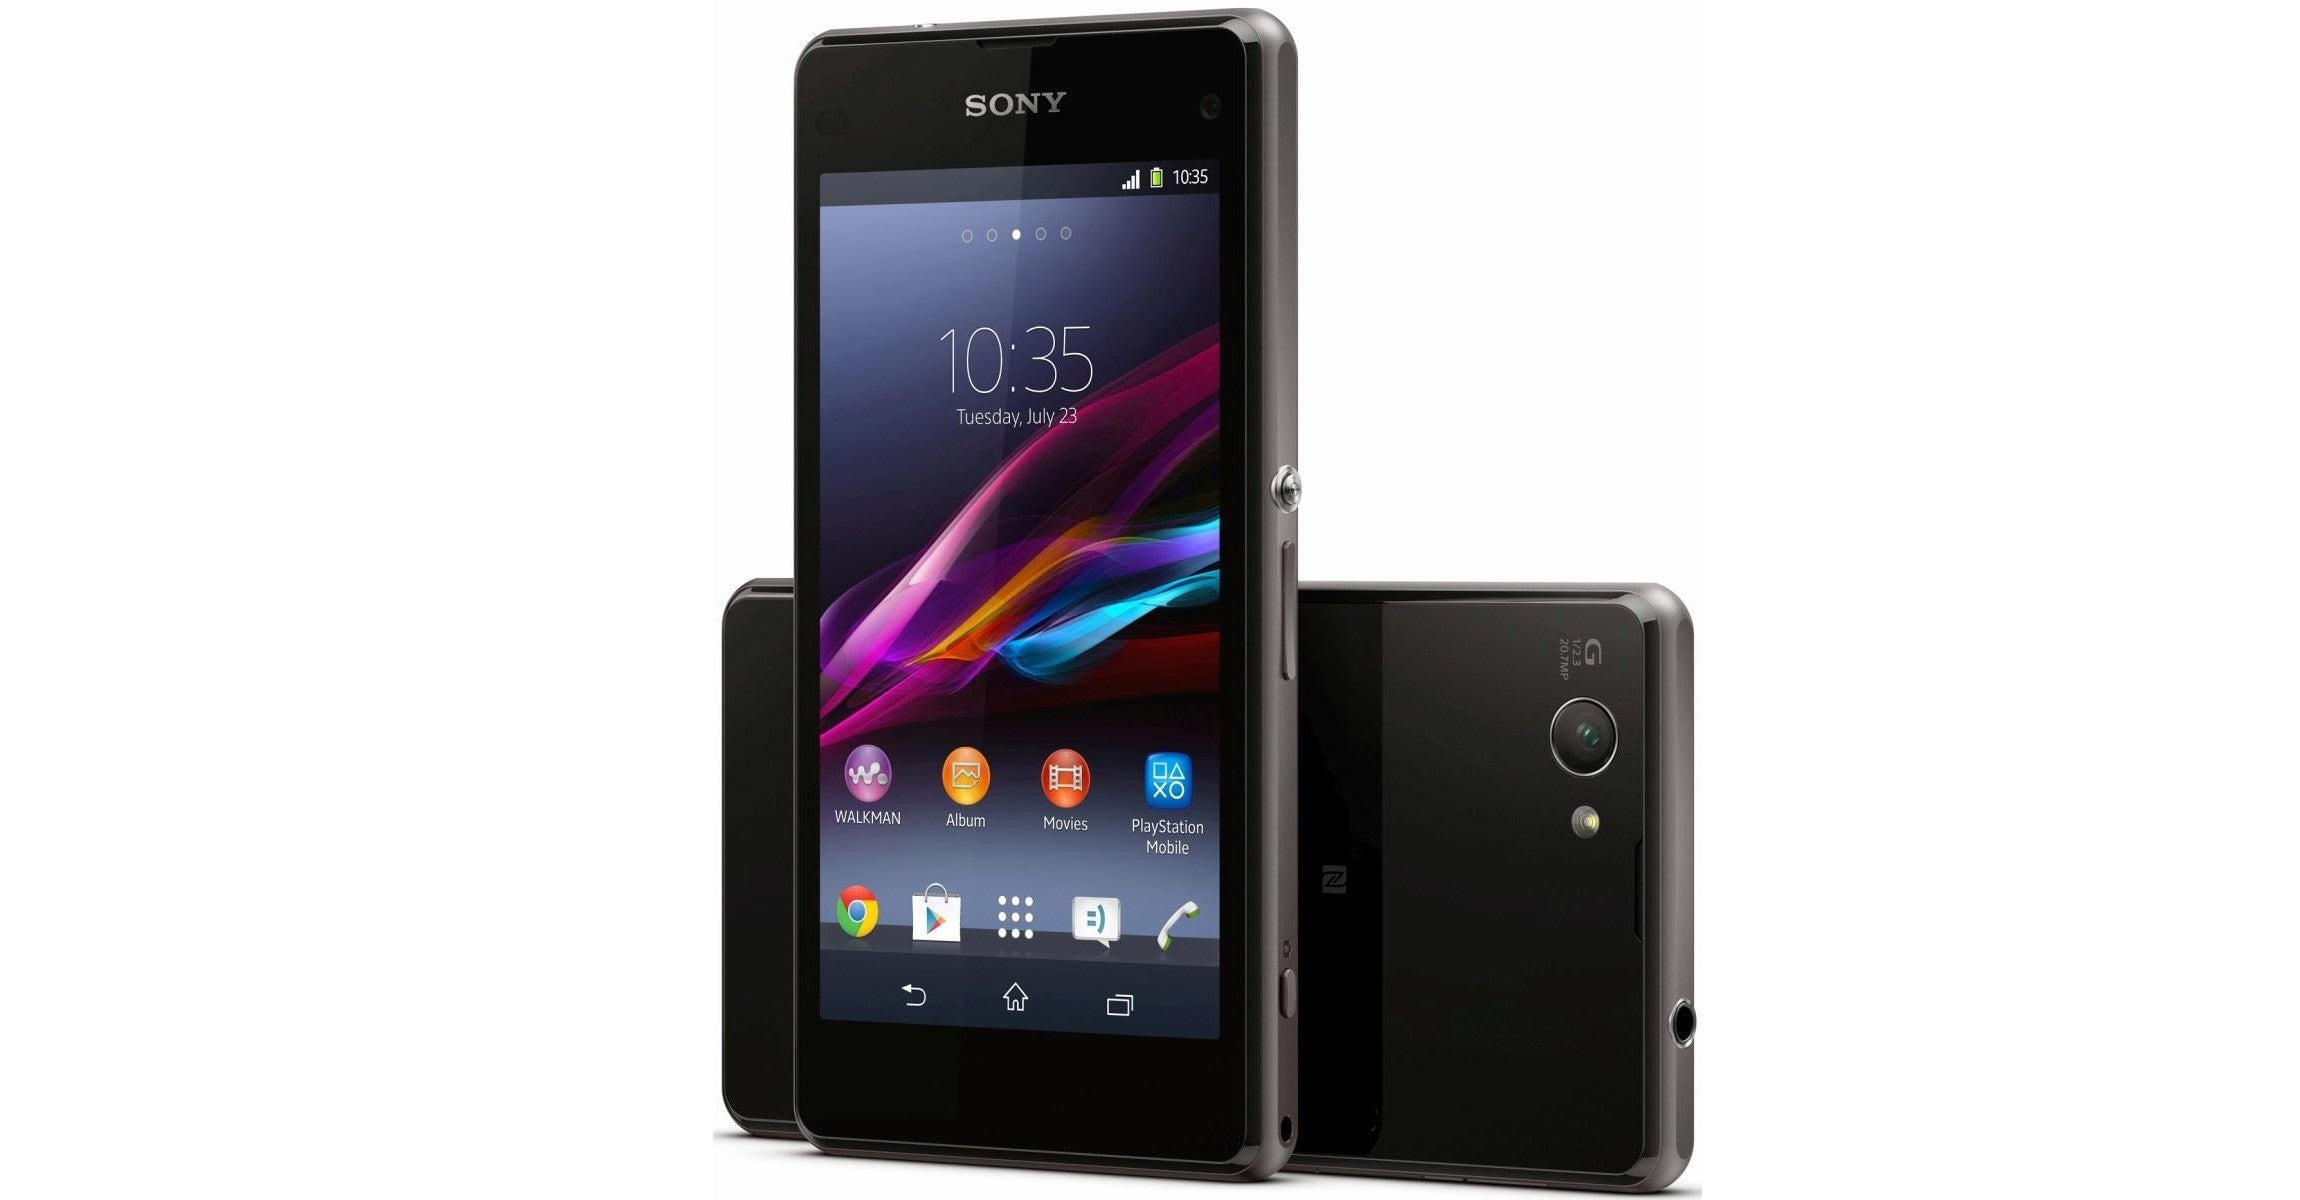 Sony Xperia Z4, Z4 Compact & Z4 Ultra rumor round-up: design, specs, performance, price and release date